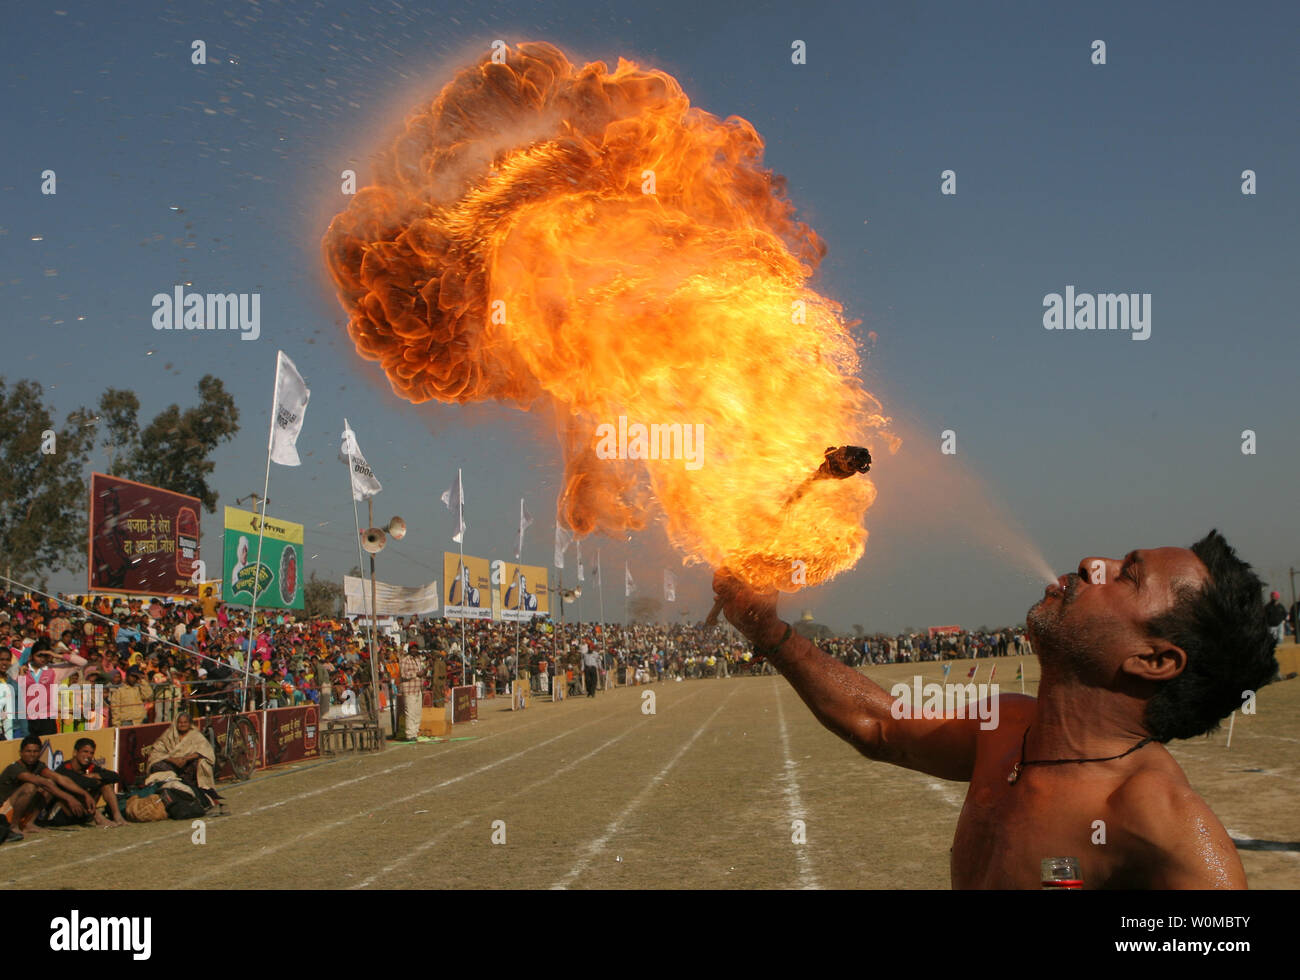 An Indian villager spews fire as he shows his skills during the Kila Raipur Sports Festival, also known as the Rural Olympics near Ludhiana, February 9, 2008. The games started in 1933 and take place over a three-day period during which competitors enter various rural sports events including equestrian events, bullock cart races and shows of strength.  (UPI Photo) Stock Photo